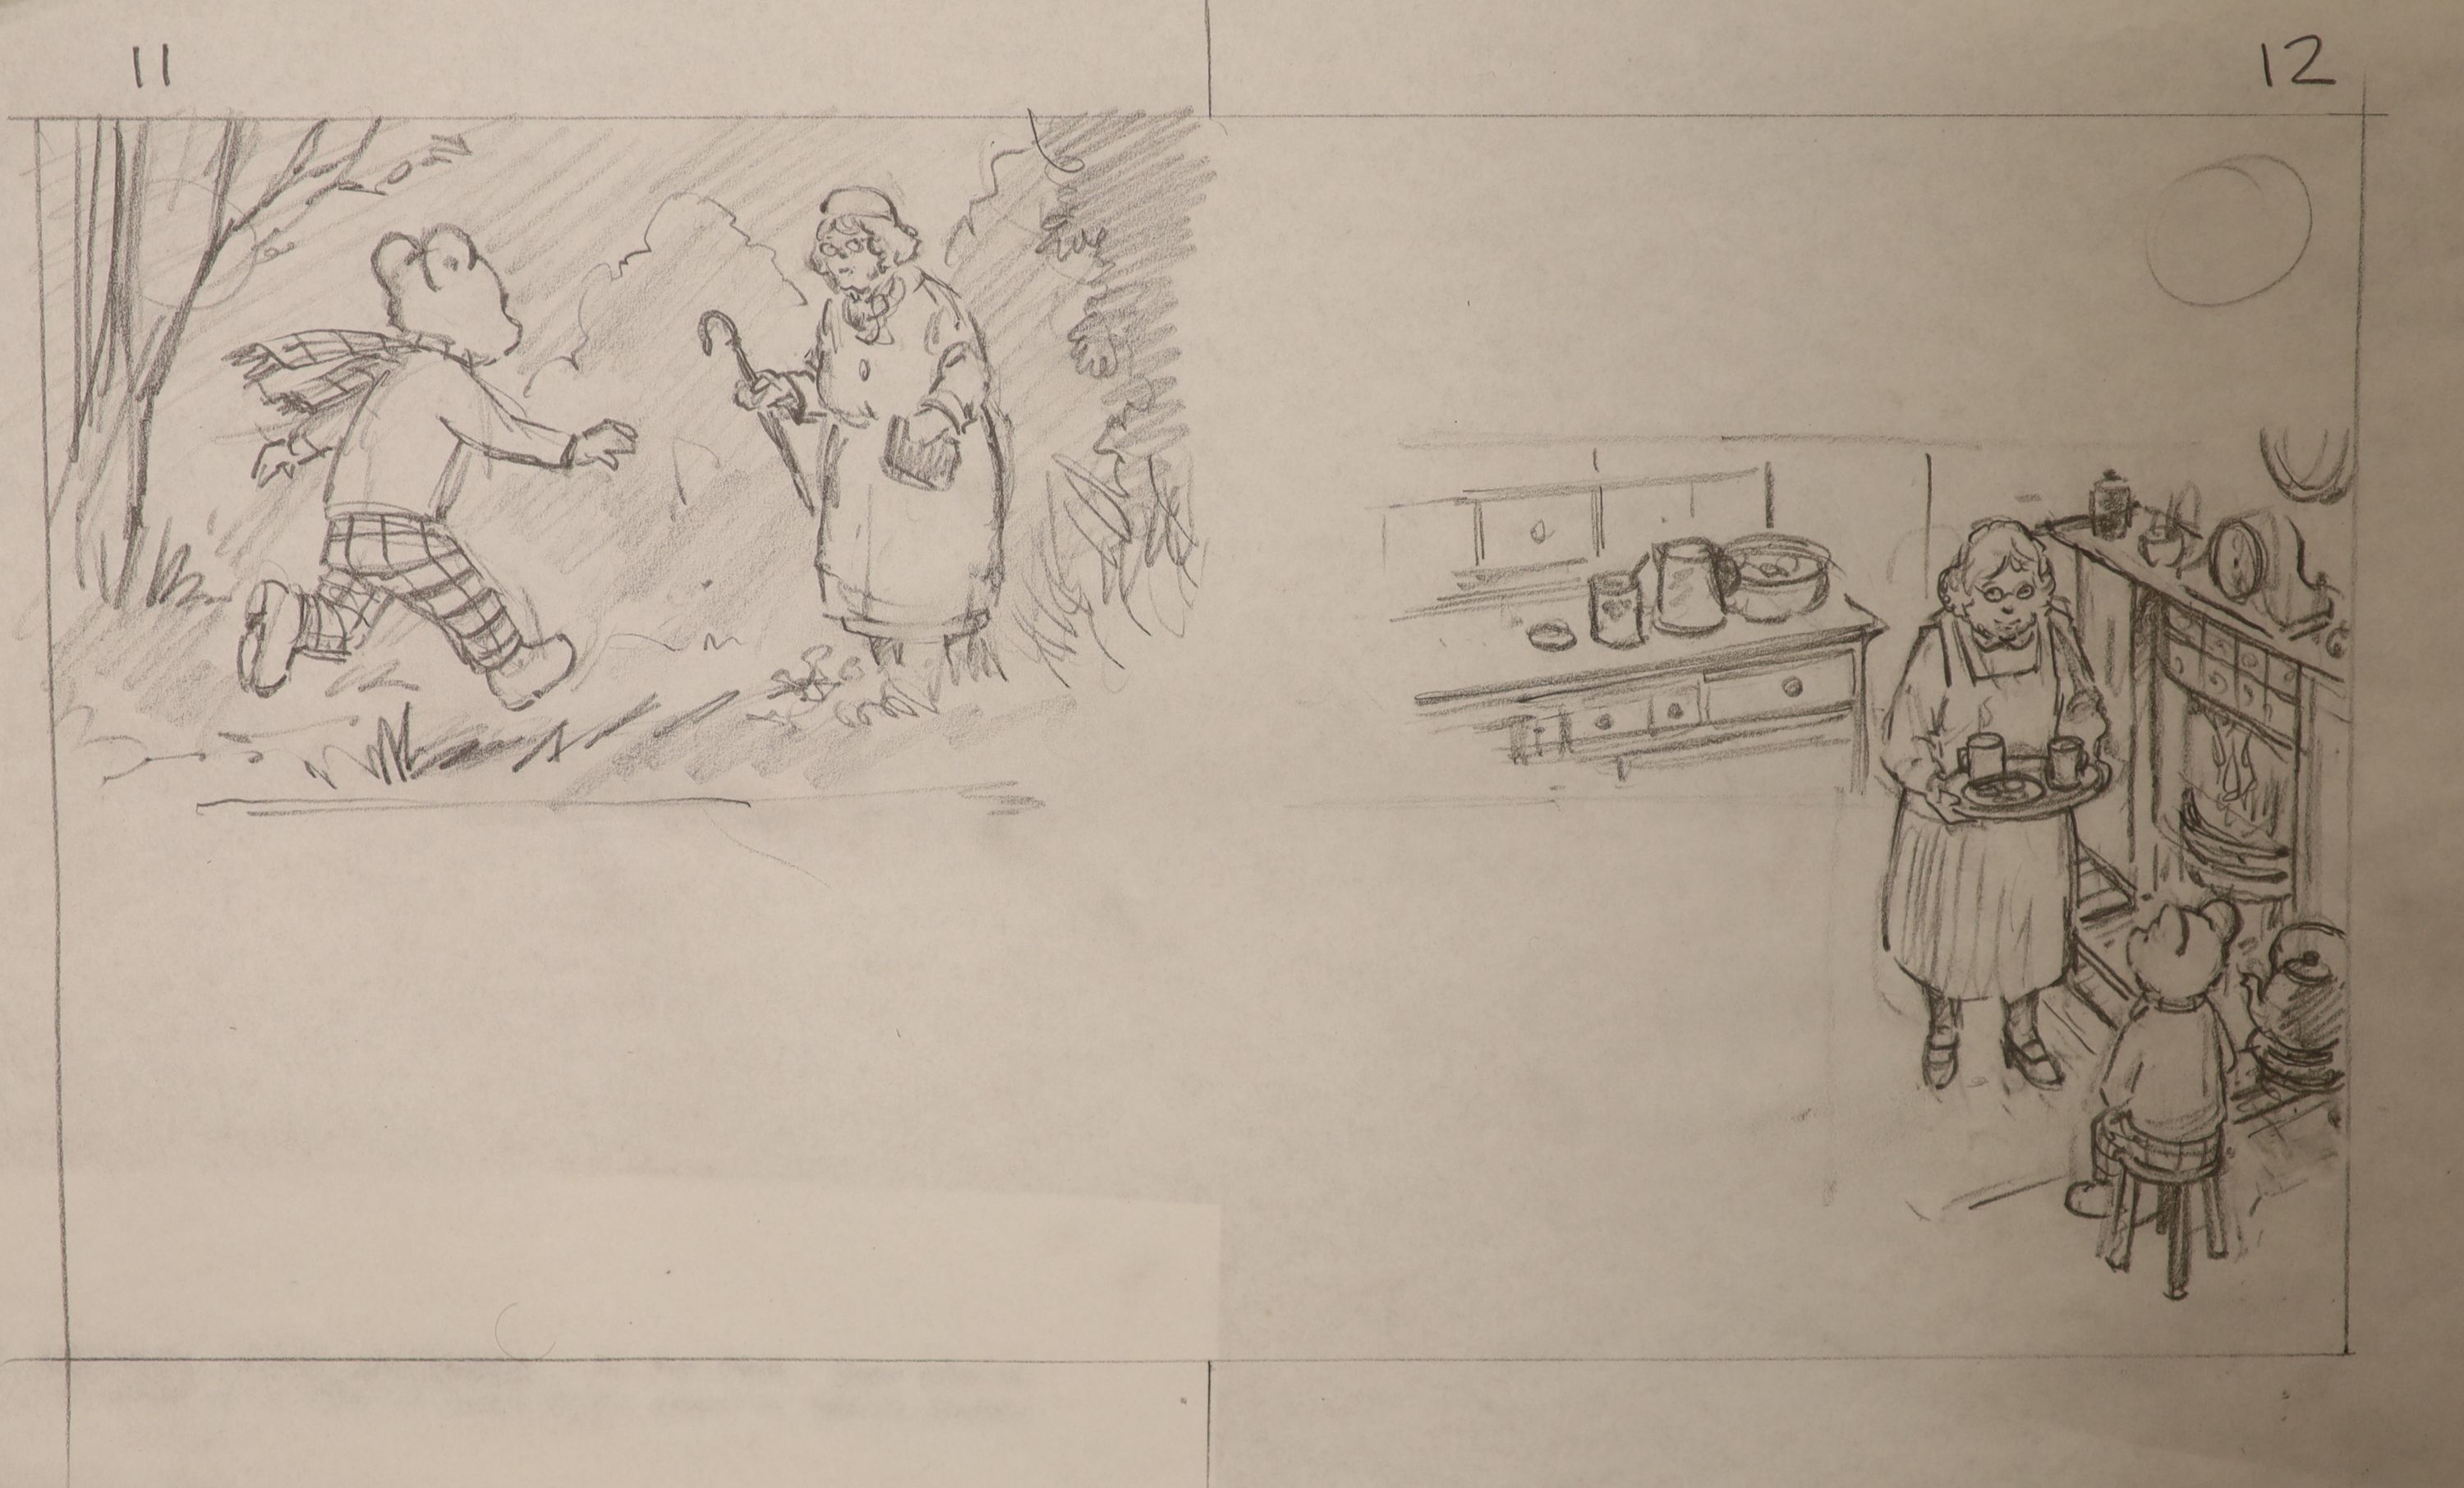 Jon Davies, three original pencil sketches for Rupert The Bear books, printed in 1986, overall 29 x 41cm, unframed